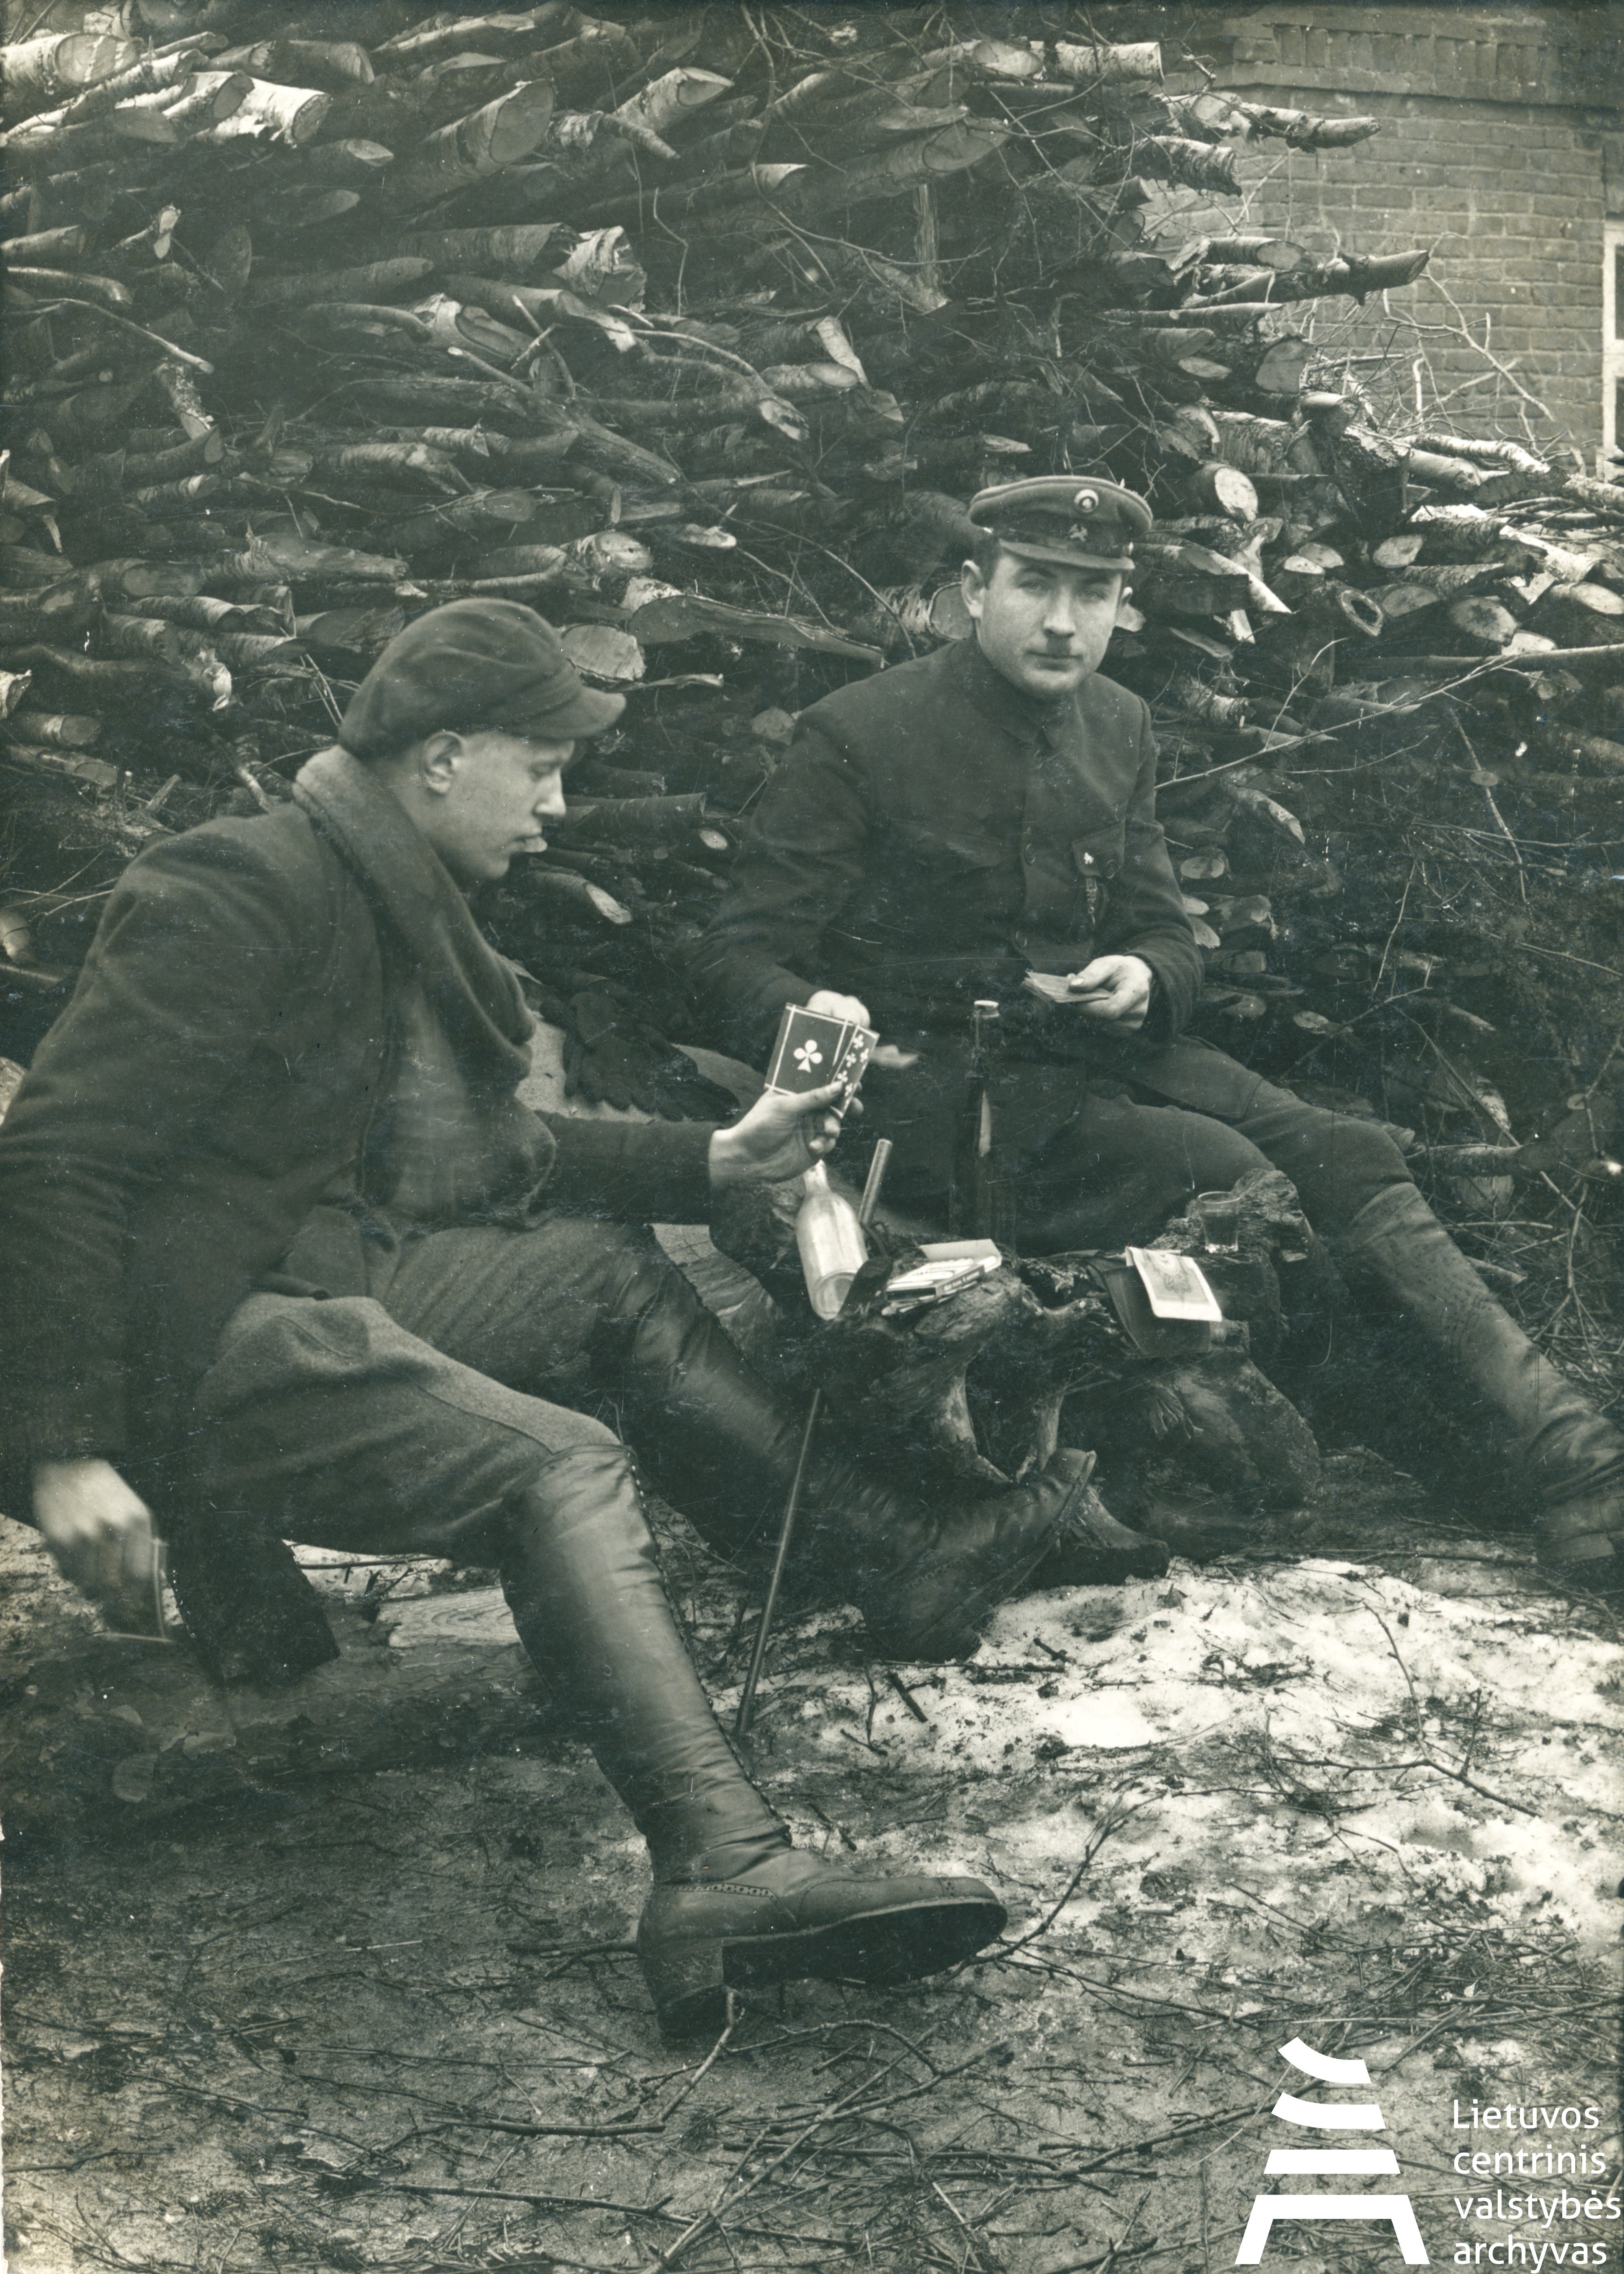 Lithuanian Central State Archives, A border policeman Pranas Venckus playing cards with a friend. Laižuva, Mažeikiai district, Lithuania, 1922. P-30547.